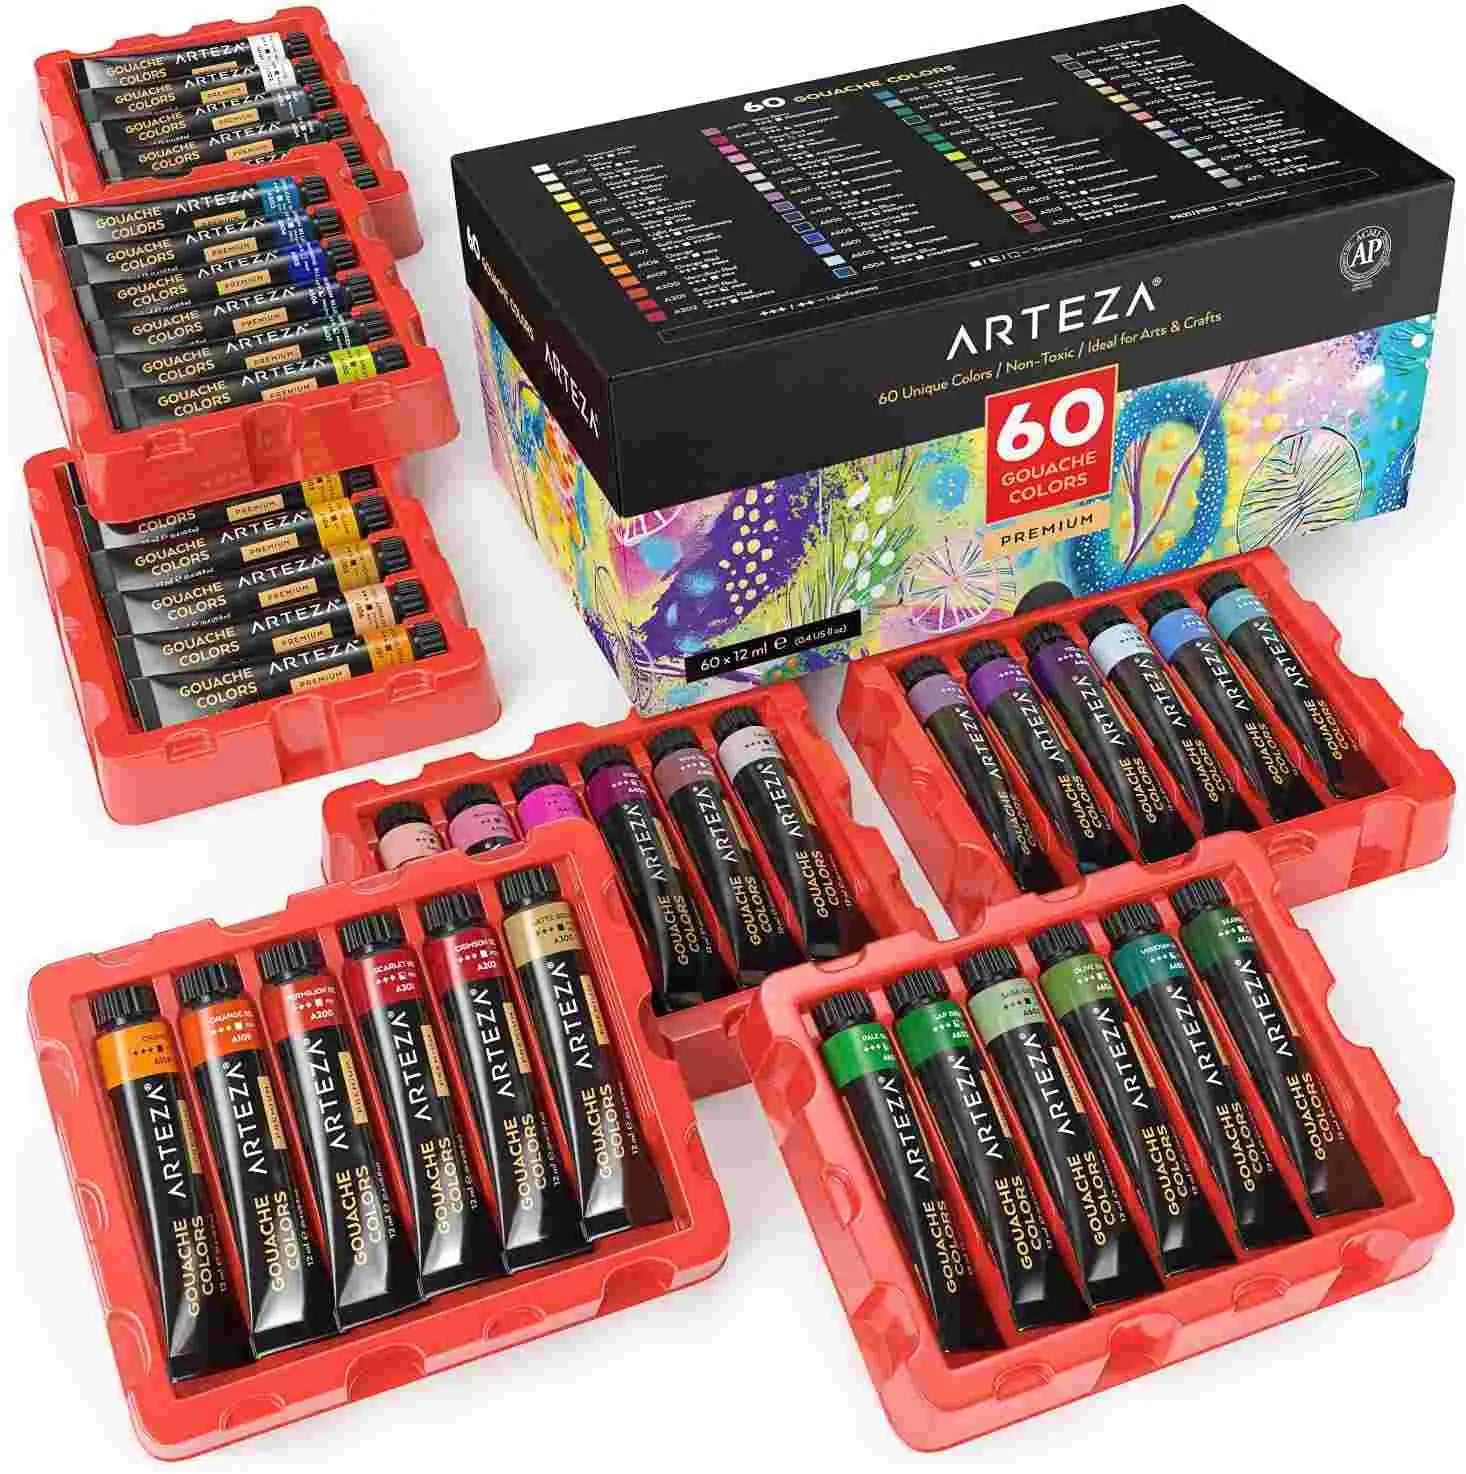 US Art Supply 62-Piece Artist Painting Set with Wood Box Easel and 12  Acrylic Paint Colors, 12 Oil Paint Colors, 12 Oil Pastels, 12 Artist  Pastels, 6